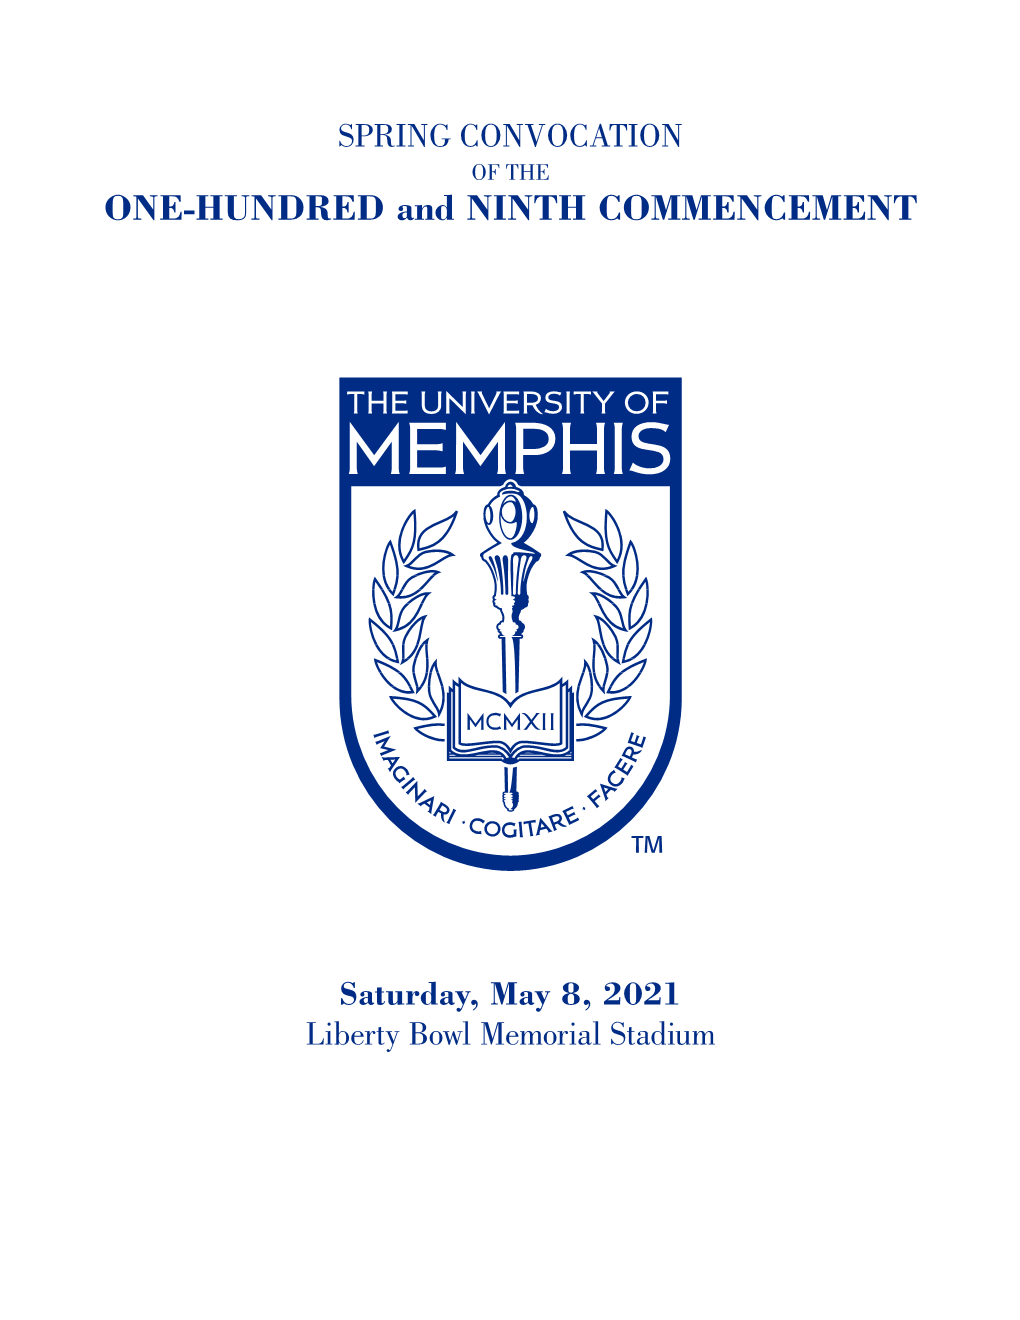 ONE-HUNDRED and NINTH COMMENCEMENT